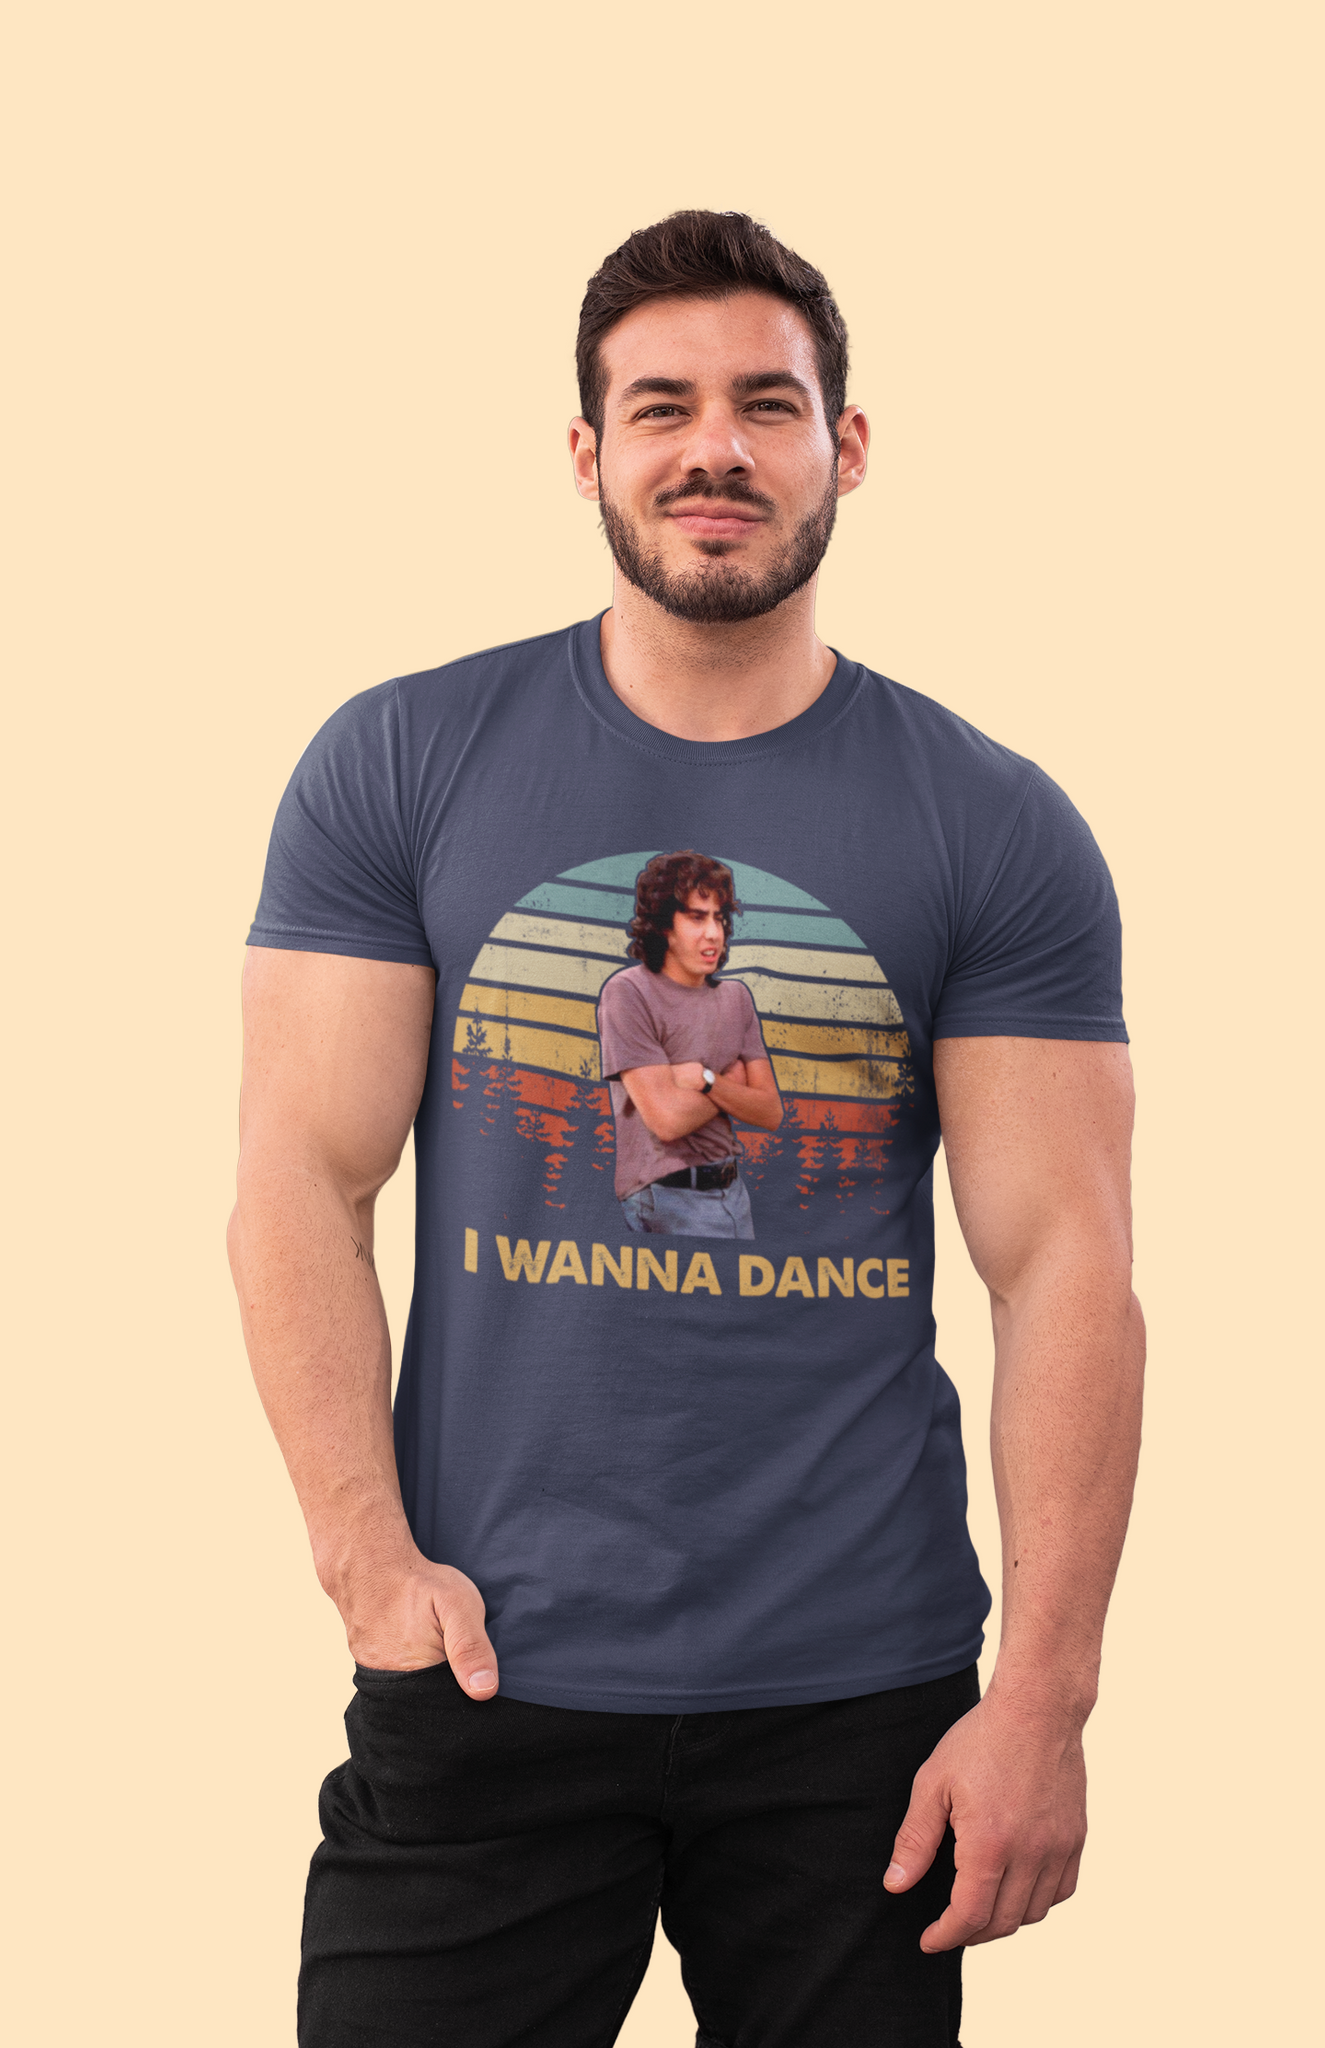 Dazed And Confused Vintage T Shirt, Mike Newhouse T Shirt, I Wanna Dance Tshirt